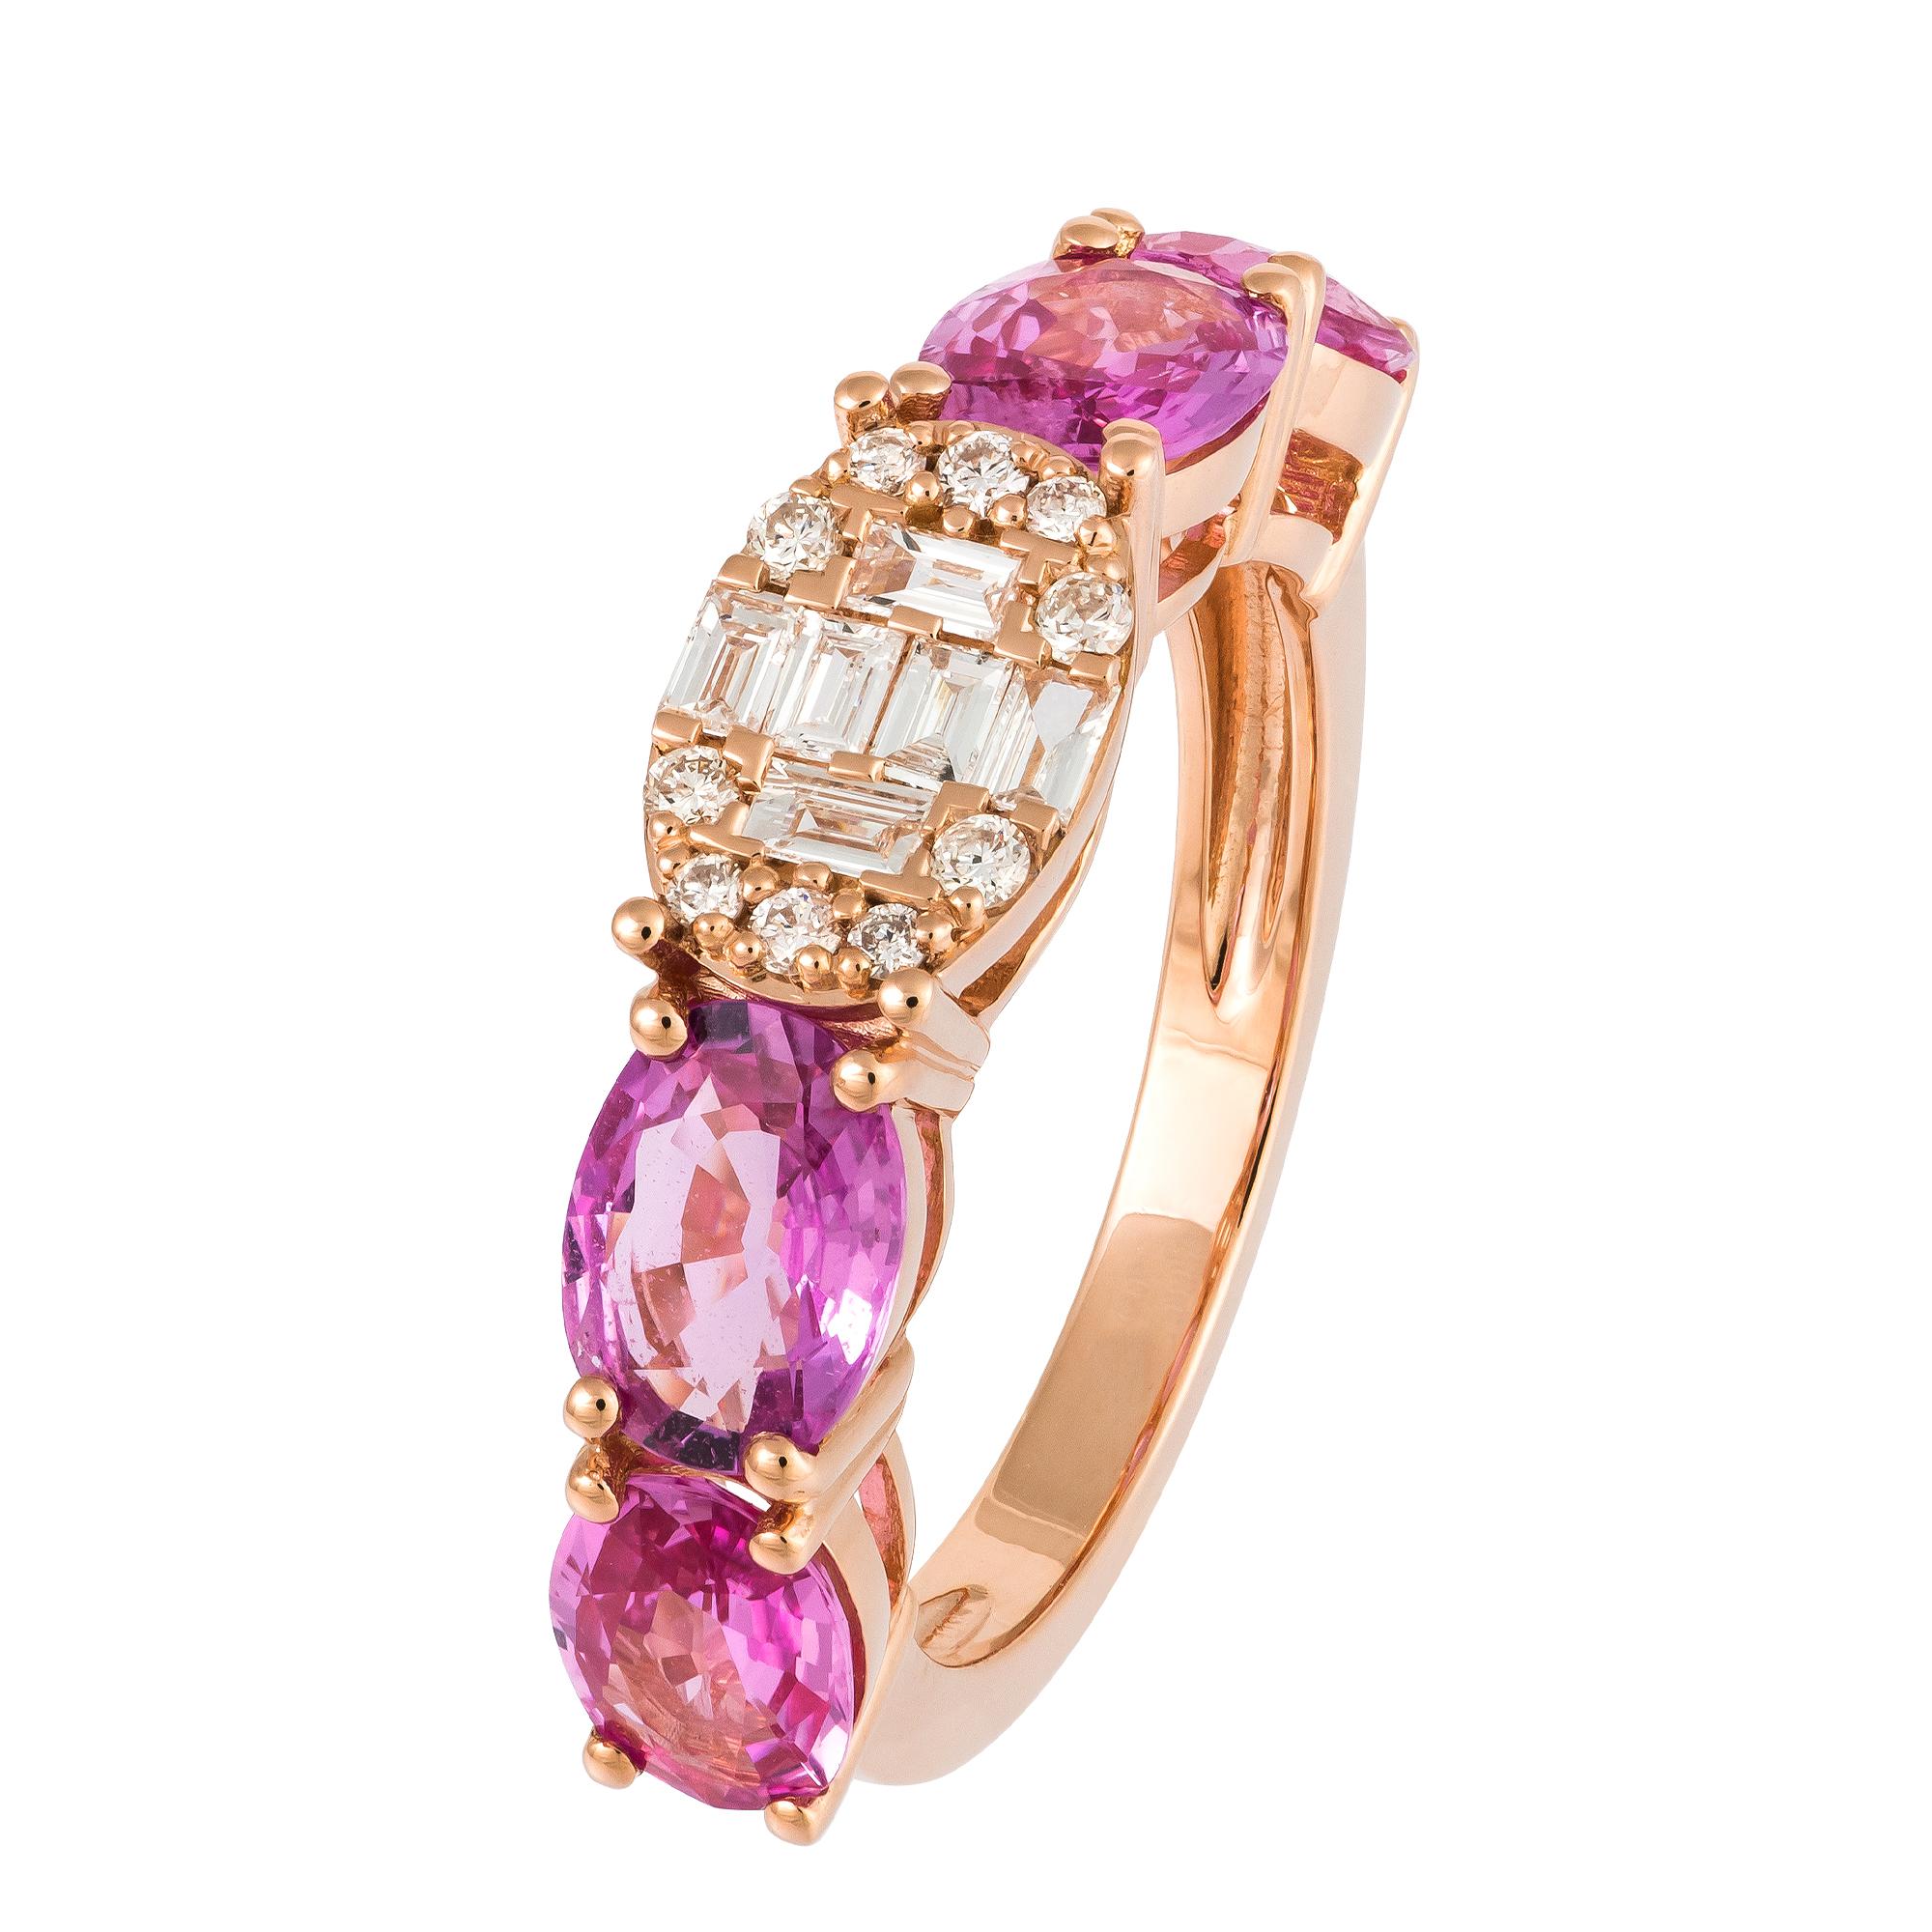 For Sale:  Breathtaking Pink 18K Gold Pink Sapphire Diamond Ring For Her 2